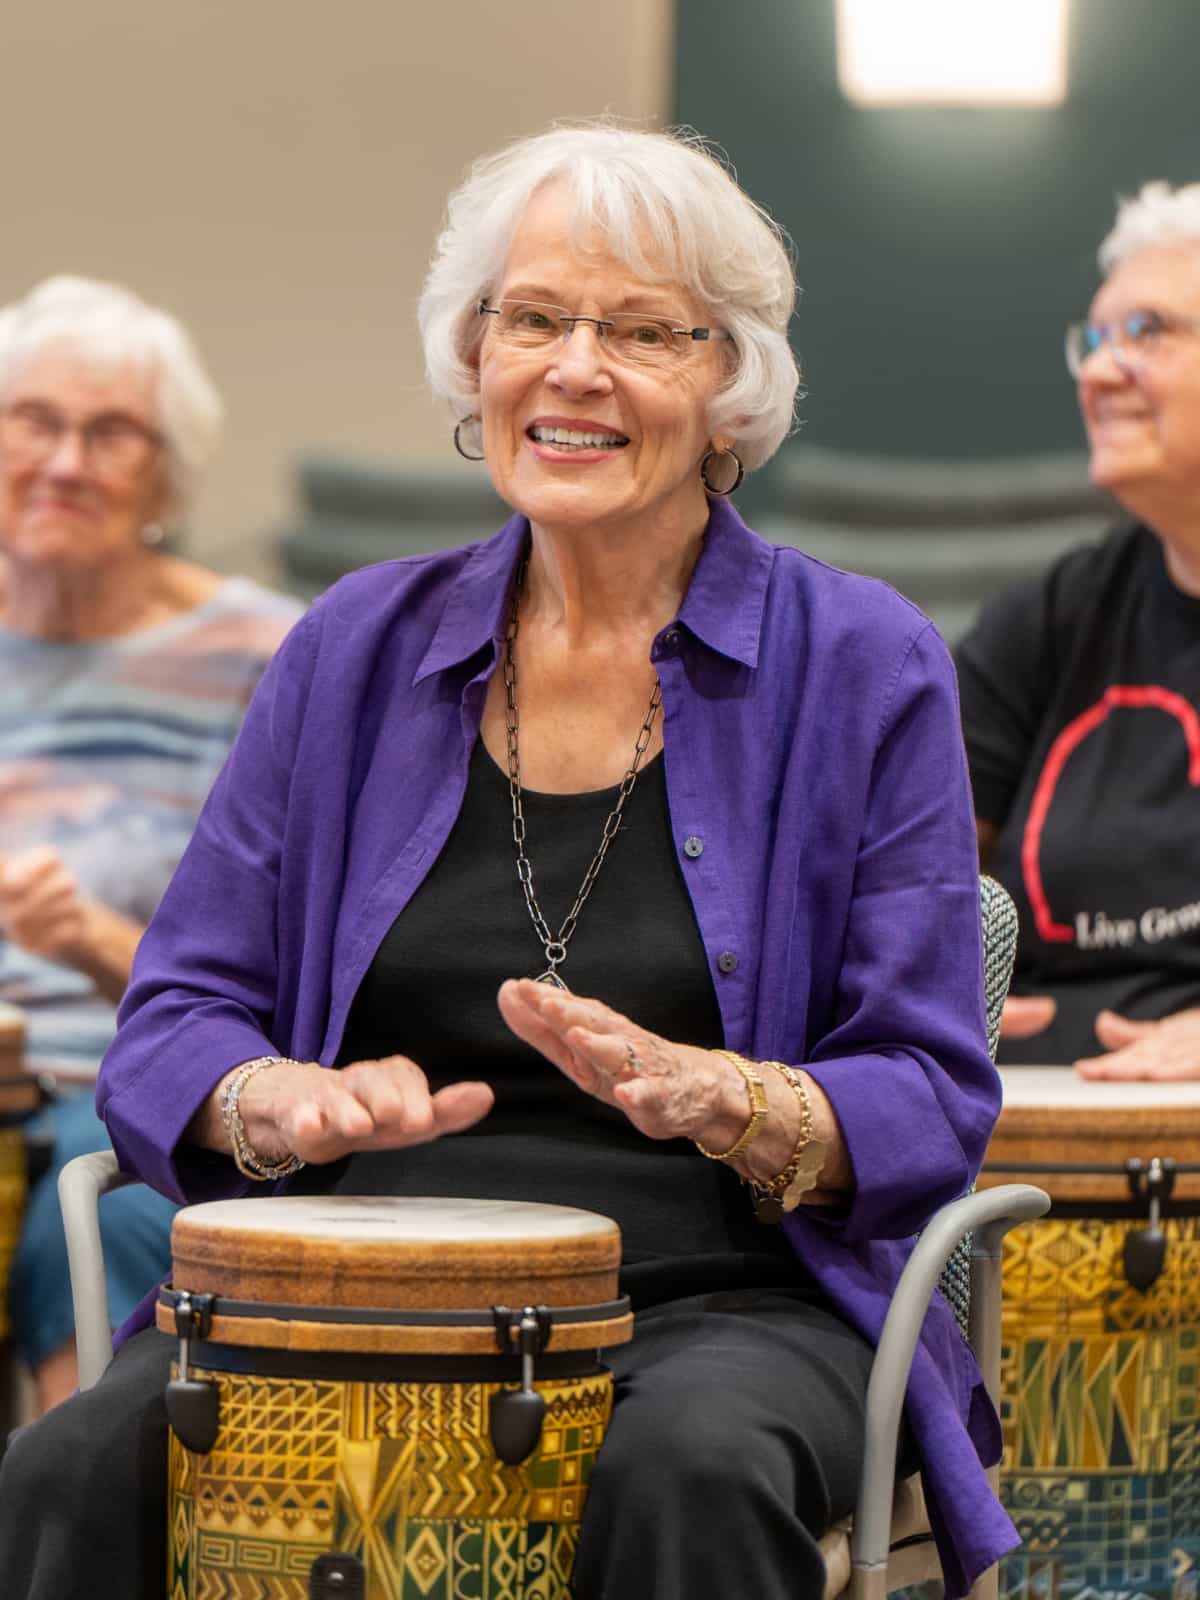 An Immanuel resident smiles while playing a hand drum.